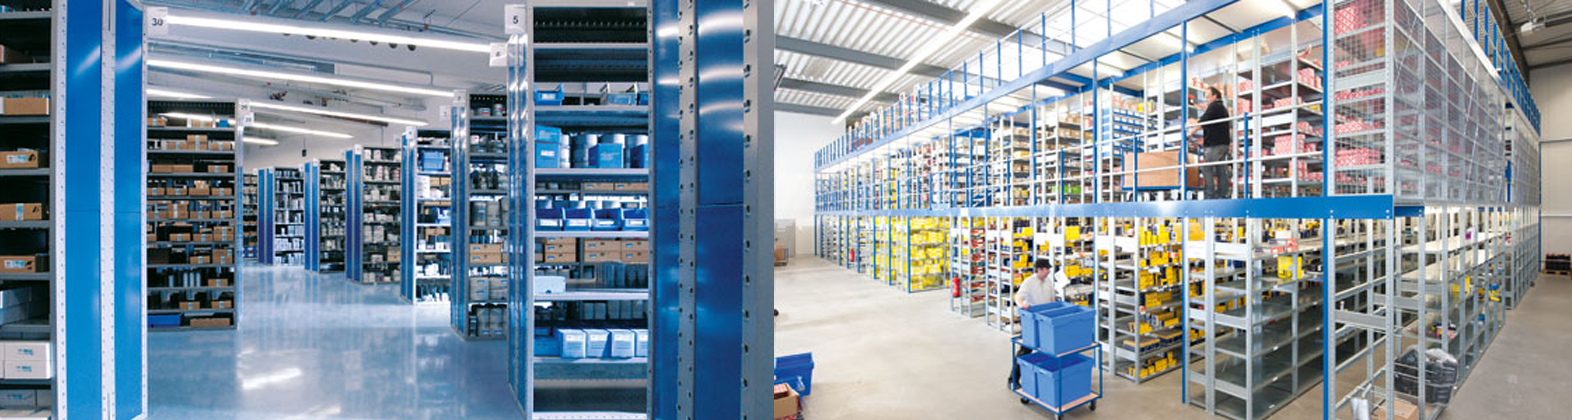 Warehouses with R3000 Industrial Shelving. Quality Industrial Shelving. Made in USA. SSI Schaefer. www.schaefershelving.com